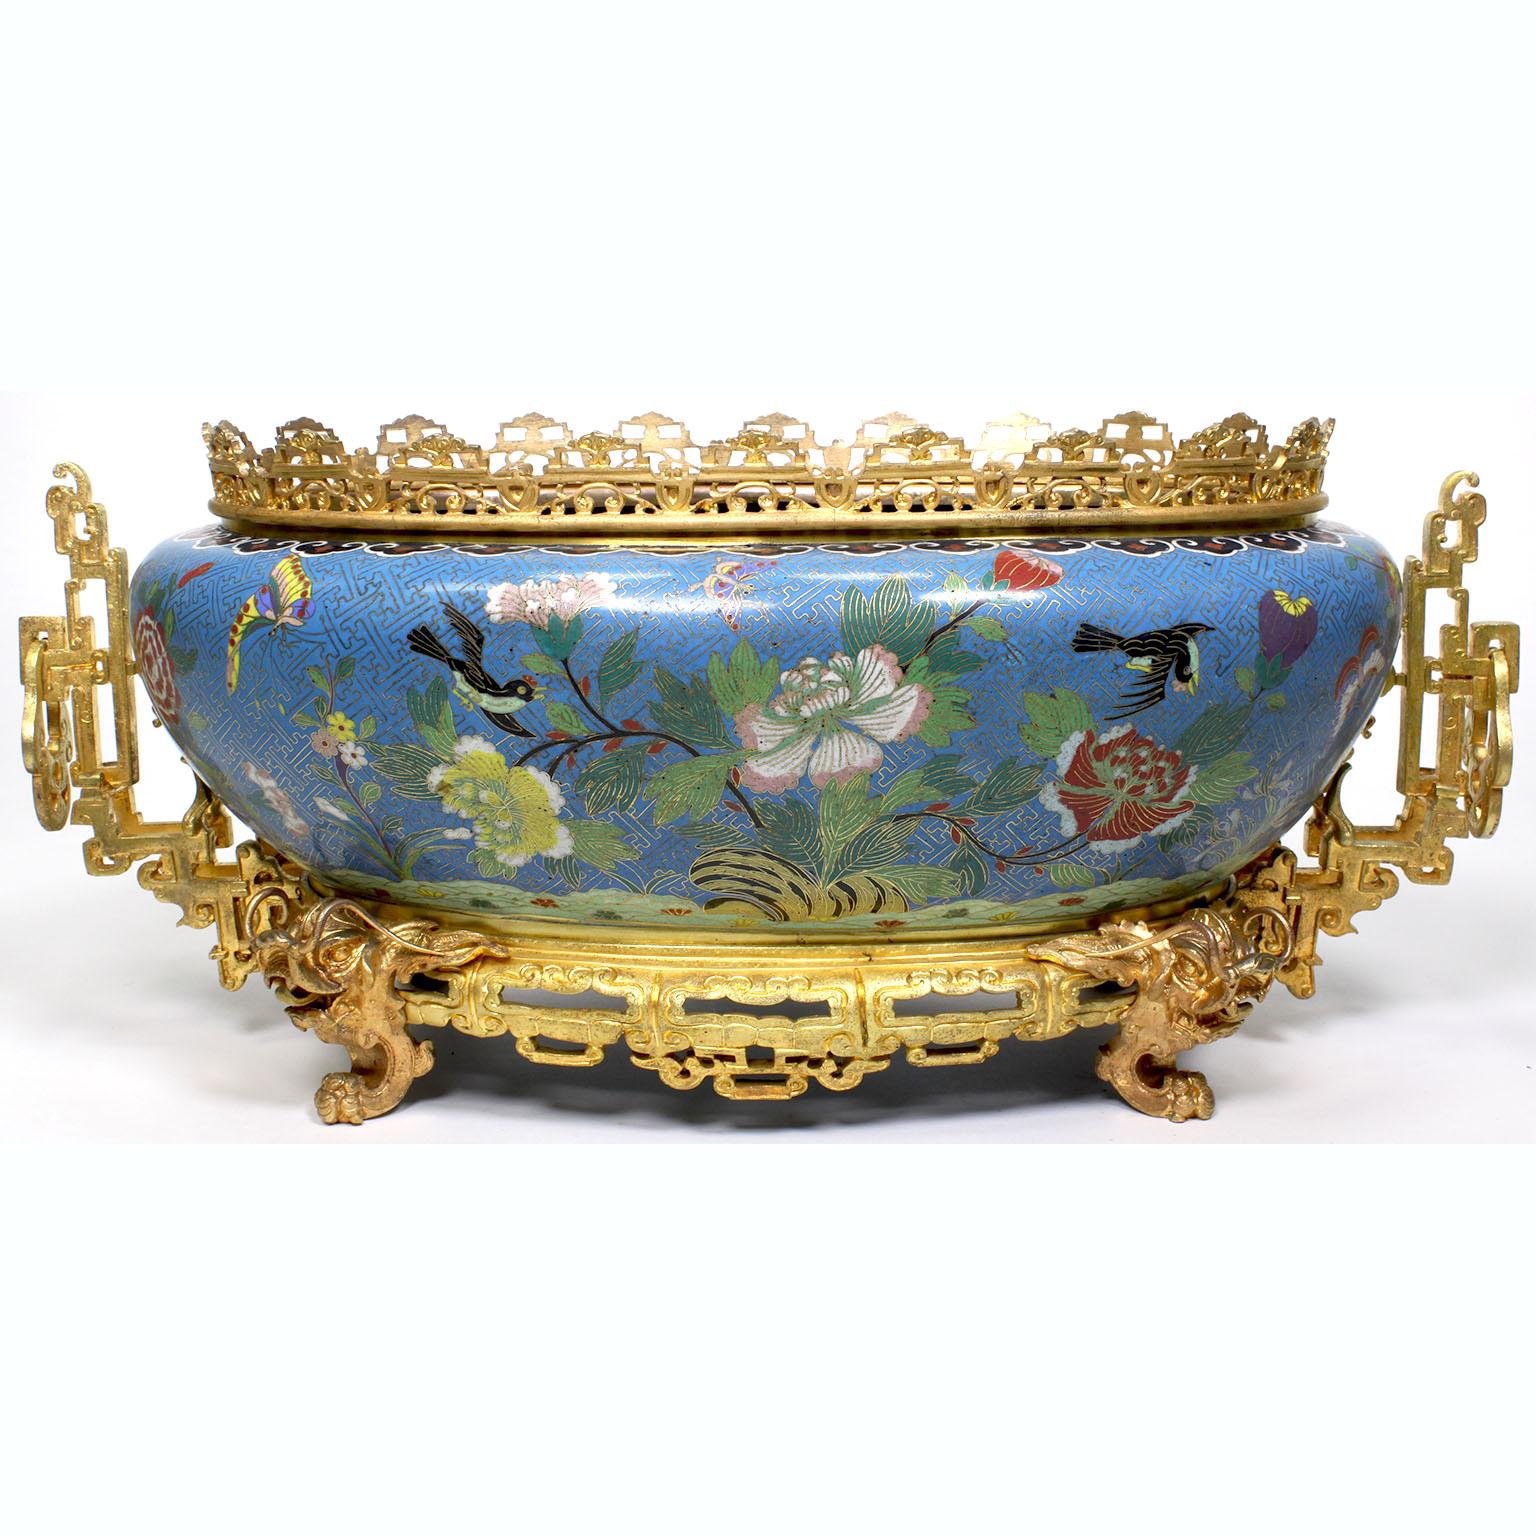 A fine Chinese 19th-20th century gilt bronze mounted cloisonné jardinière (planter). The beautifully and finely executed late Qing dynasty ovoid body cloisonné enamel jardiniere with a blue-Celeste background and colorful enameled depictions of